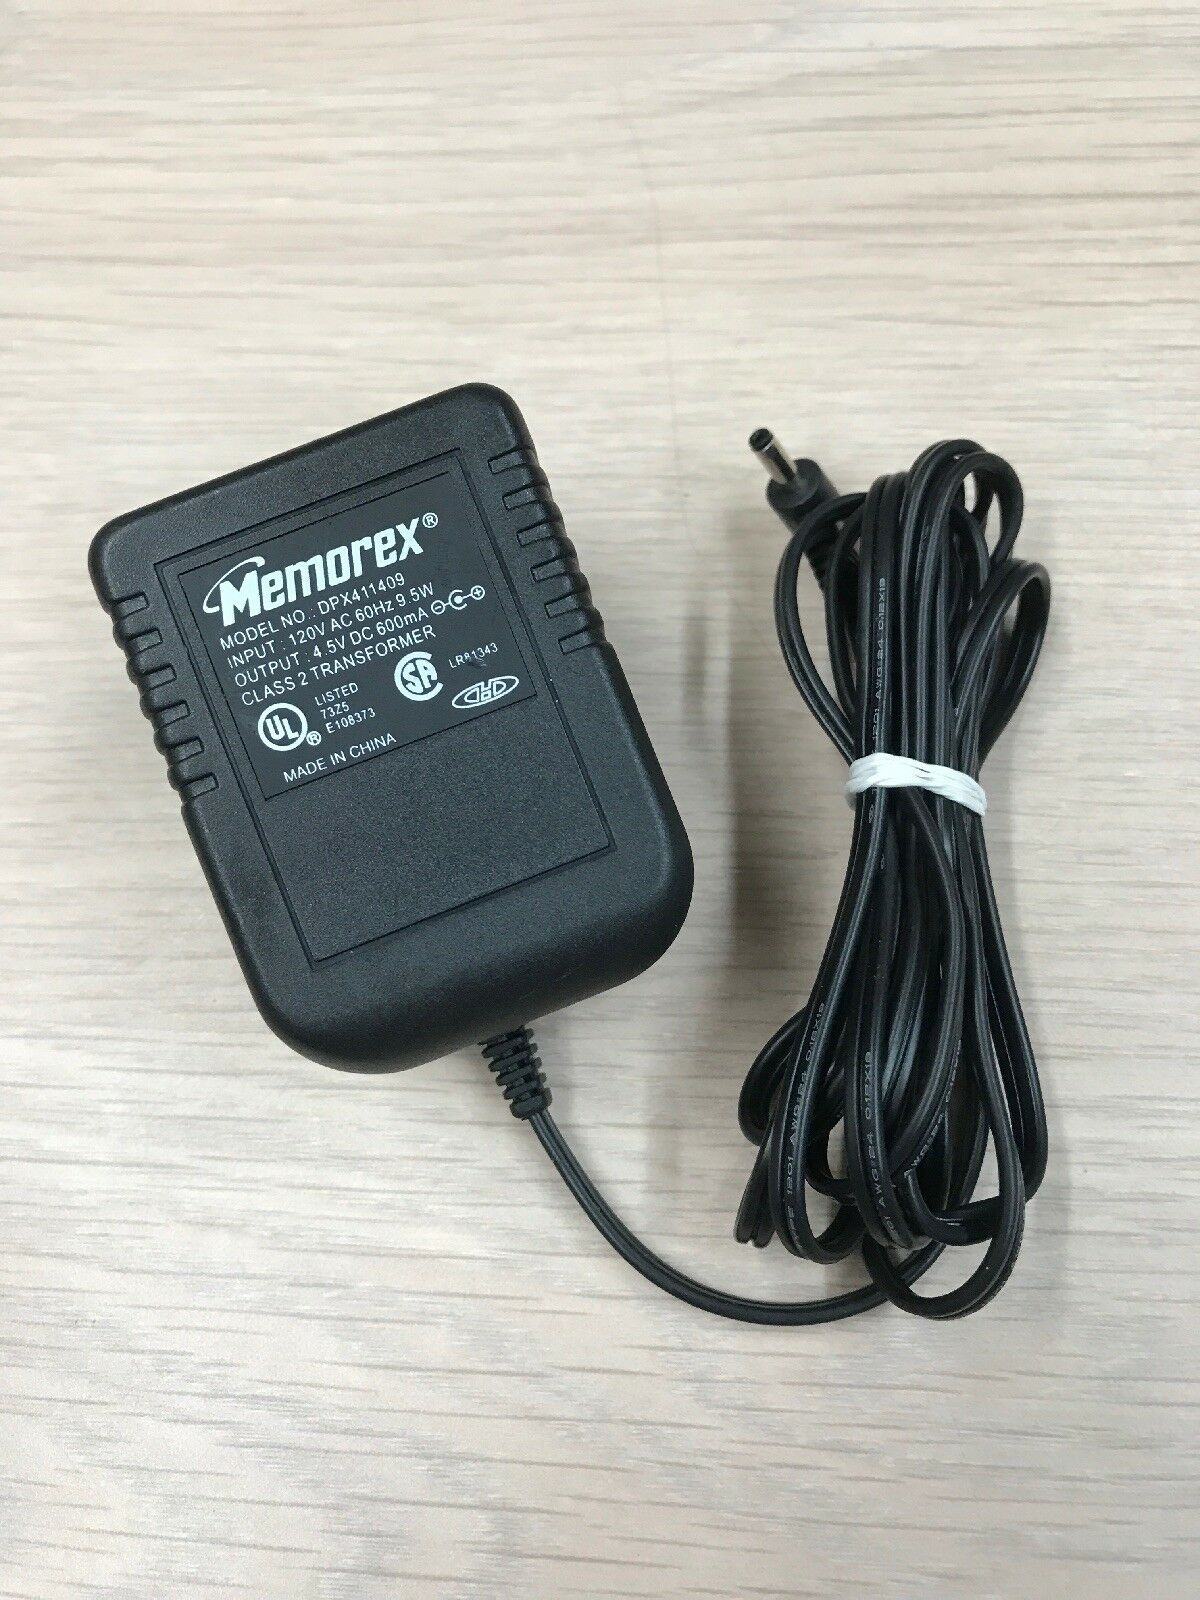 *Brand NEW*4.5vdc 600mA AC Adapter Memorex DXP411409 Charger Power Supply